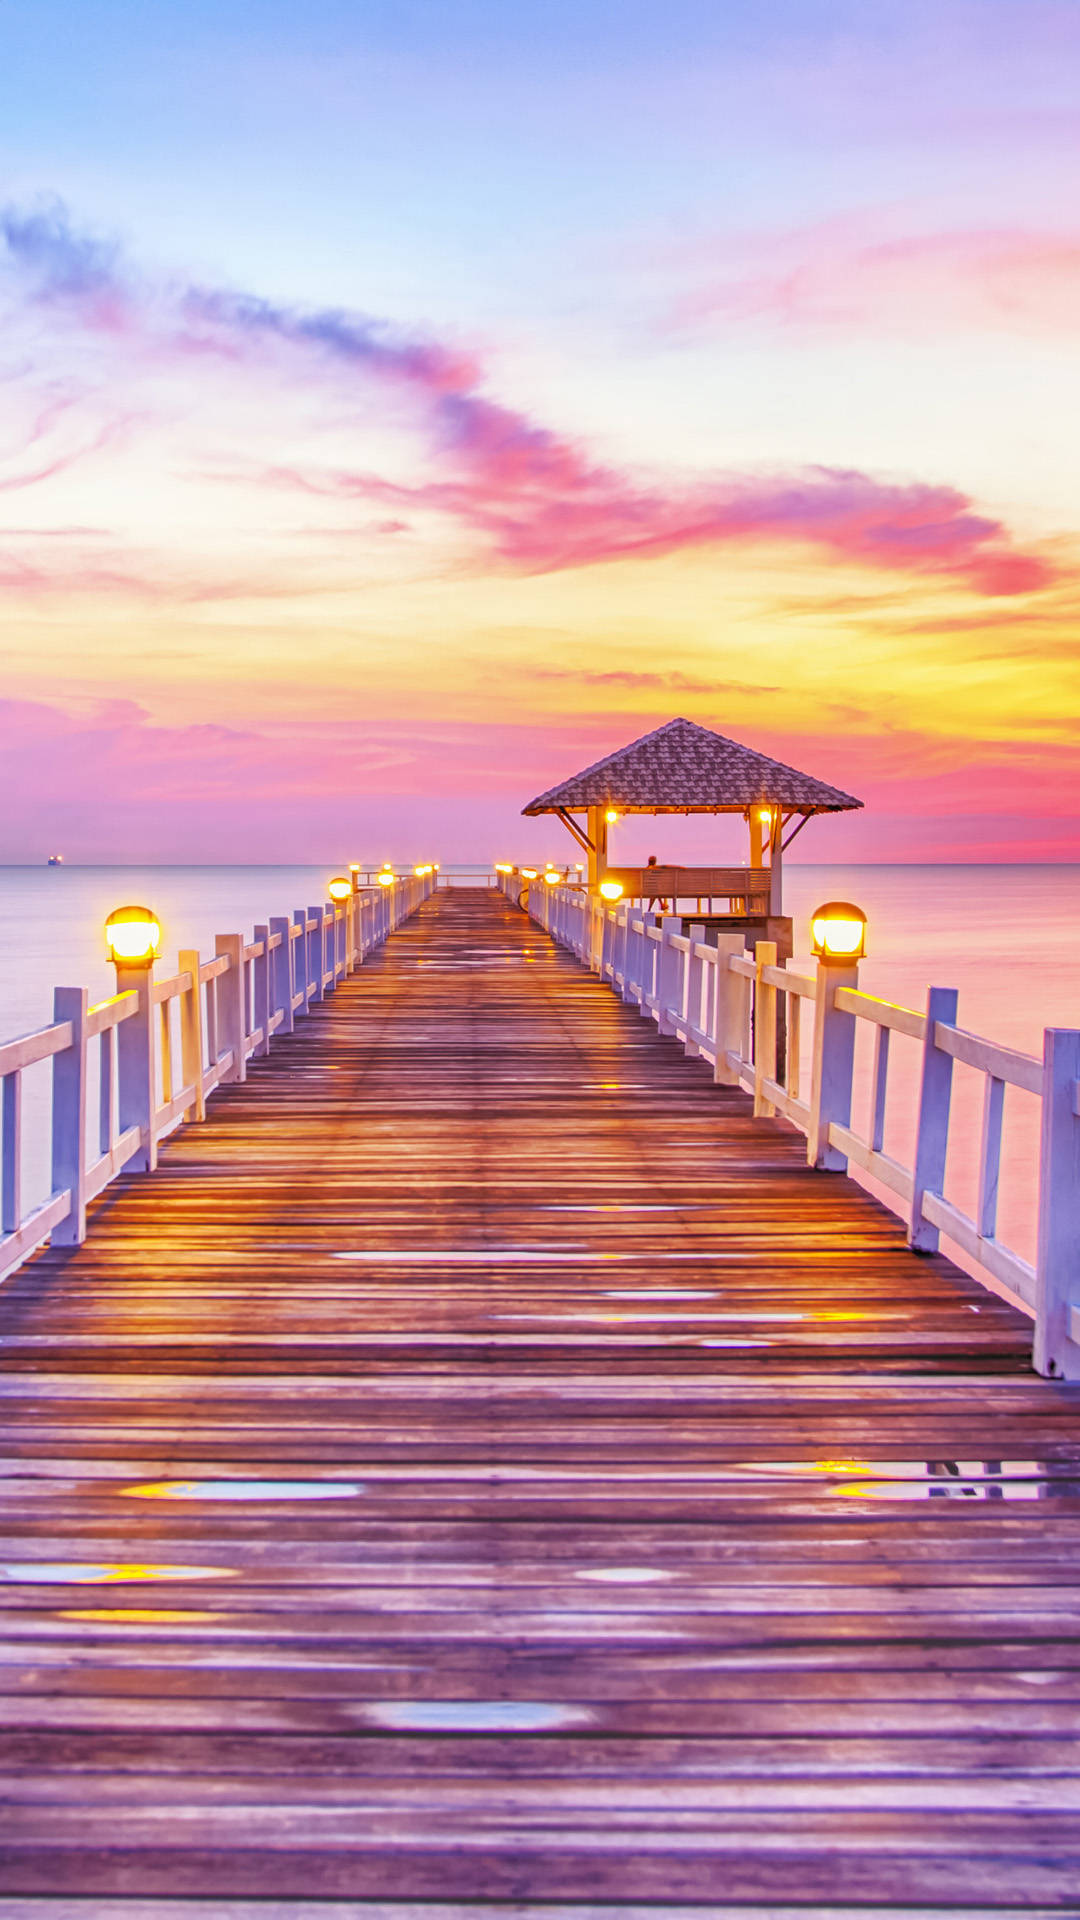 A Wooden Pier With A Sunset View Wallpaper